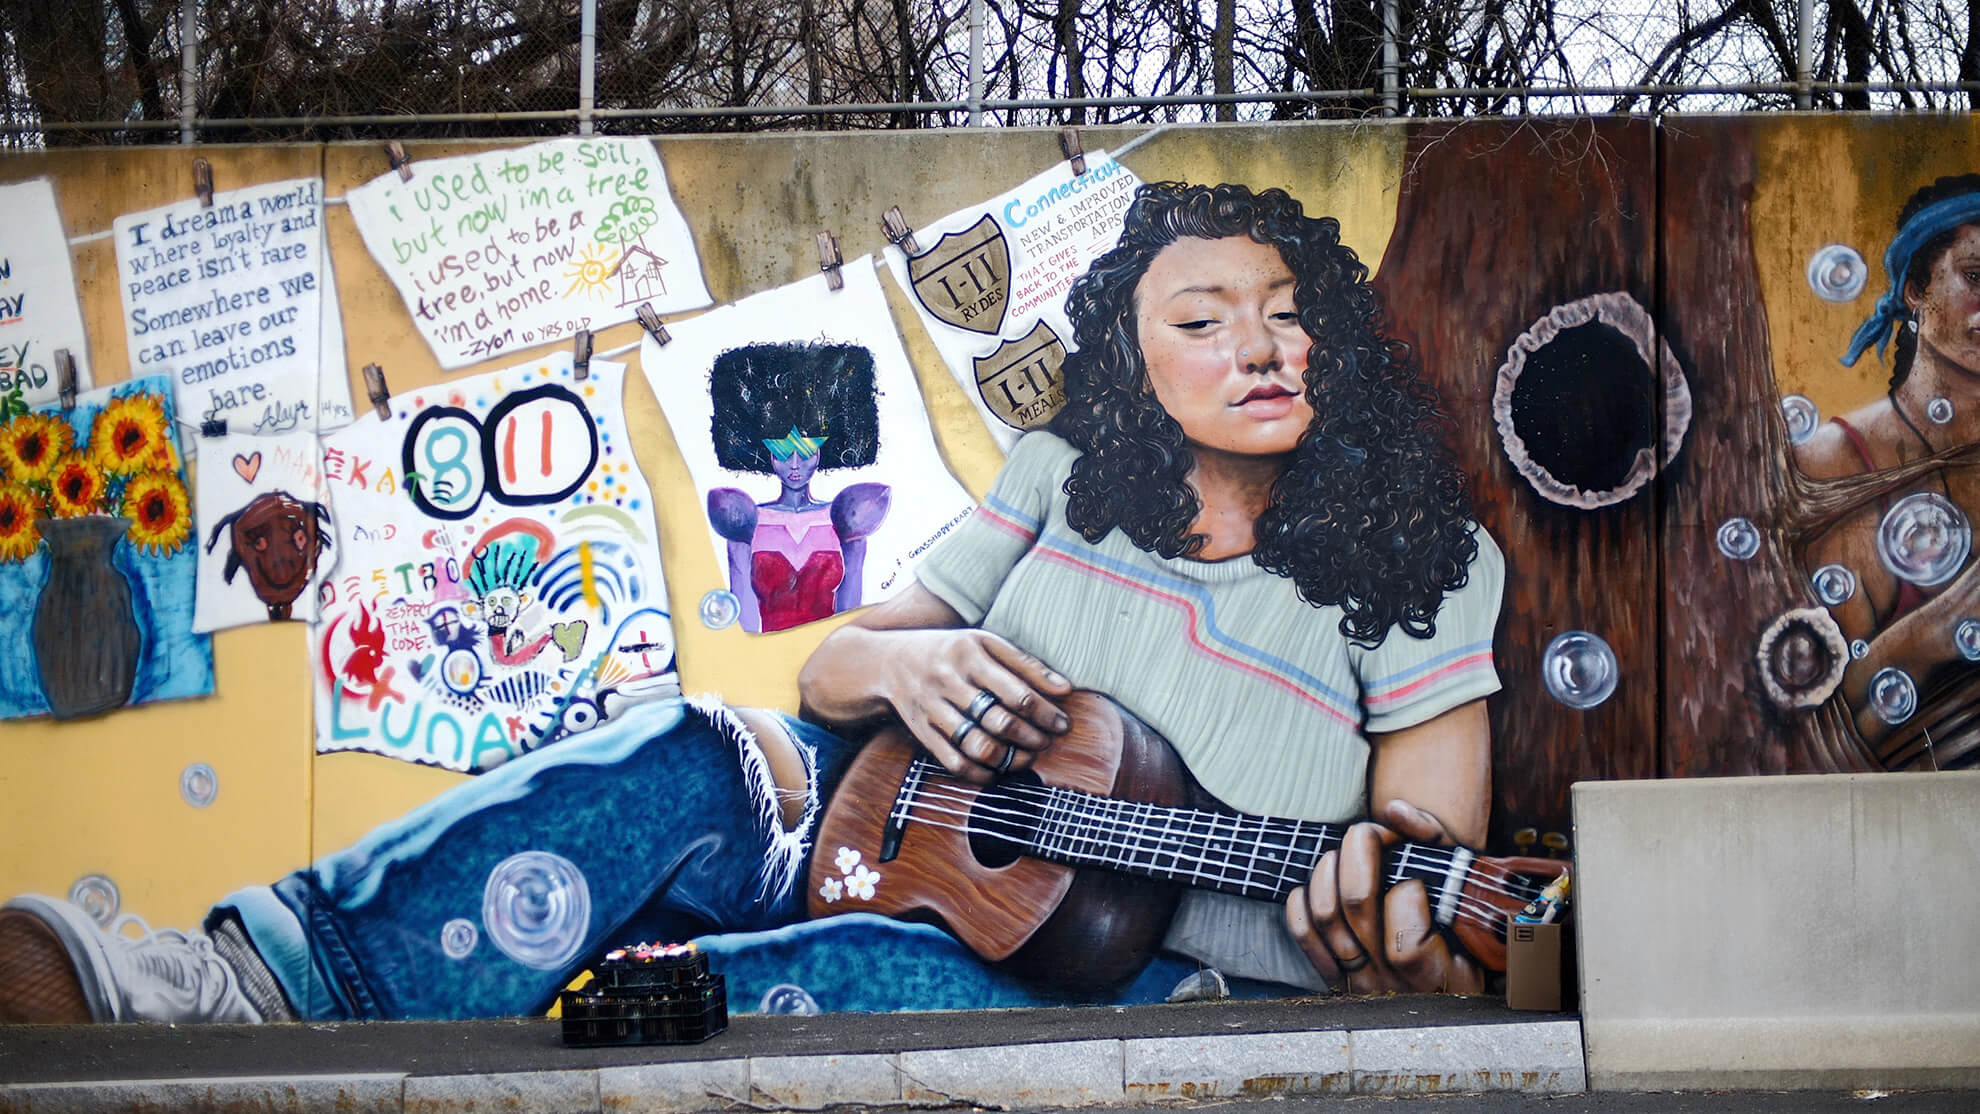 A full image showcasing part of the mural "Star Gazing." Central to the image is a light-skinned young Black woman with long, curly hair playing a ukulele while leaning against a tree trunk. To the left are numerous pictures that appear to have been drawn by children, and to the right are bubbles floating up above a Jersey barrier, which is not part of the mural.